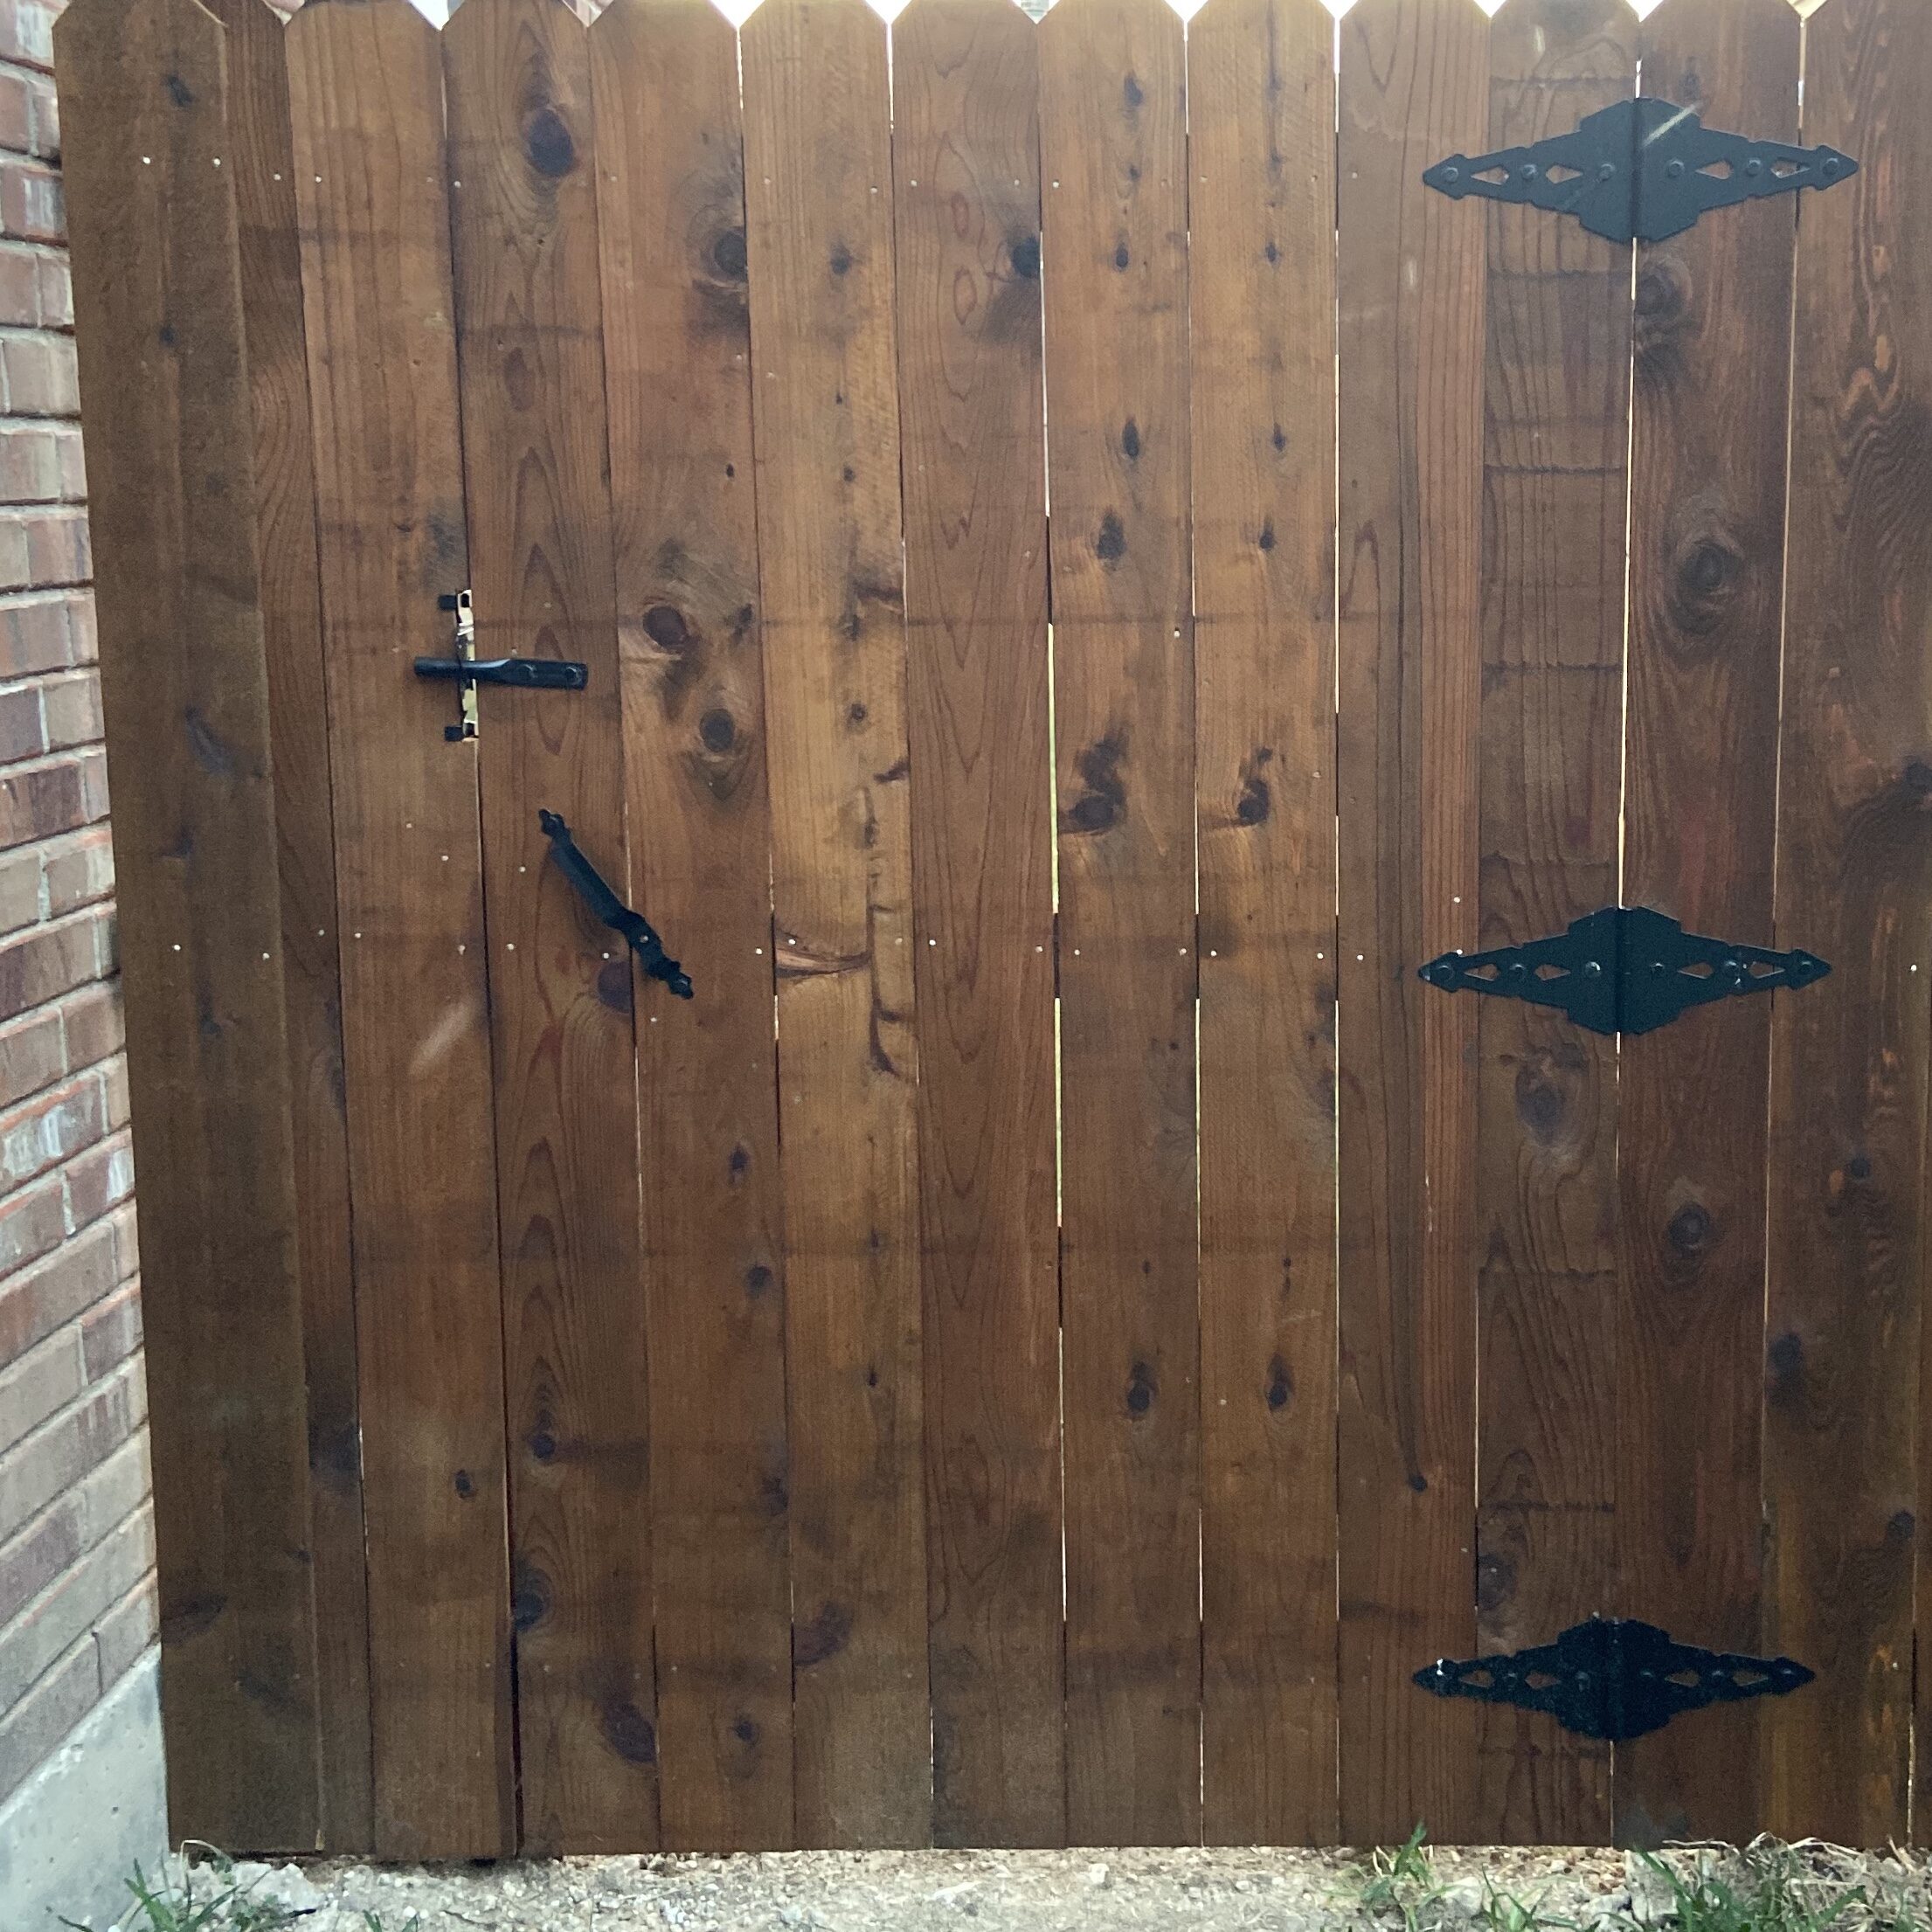 Basic Builder Grade Fence Style but High Quality Fence Company Little Elm TX